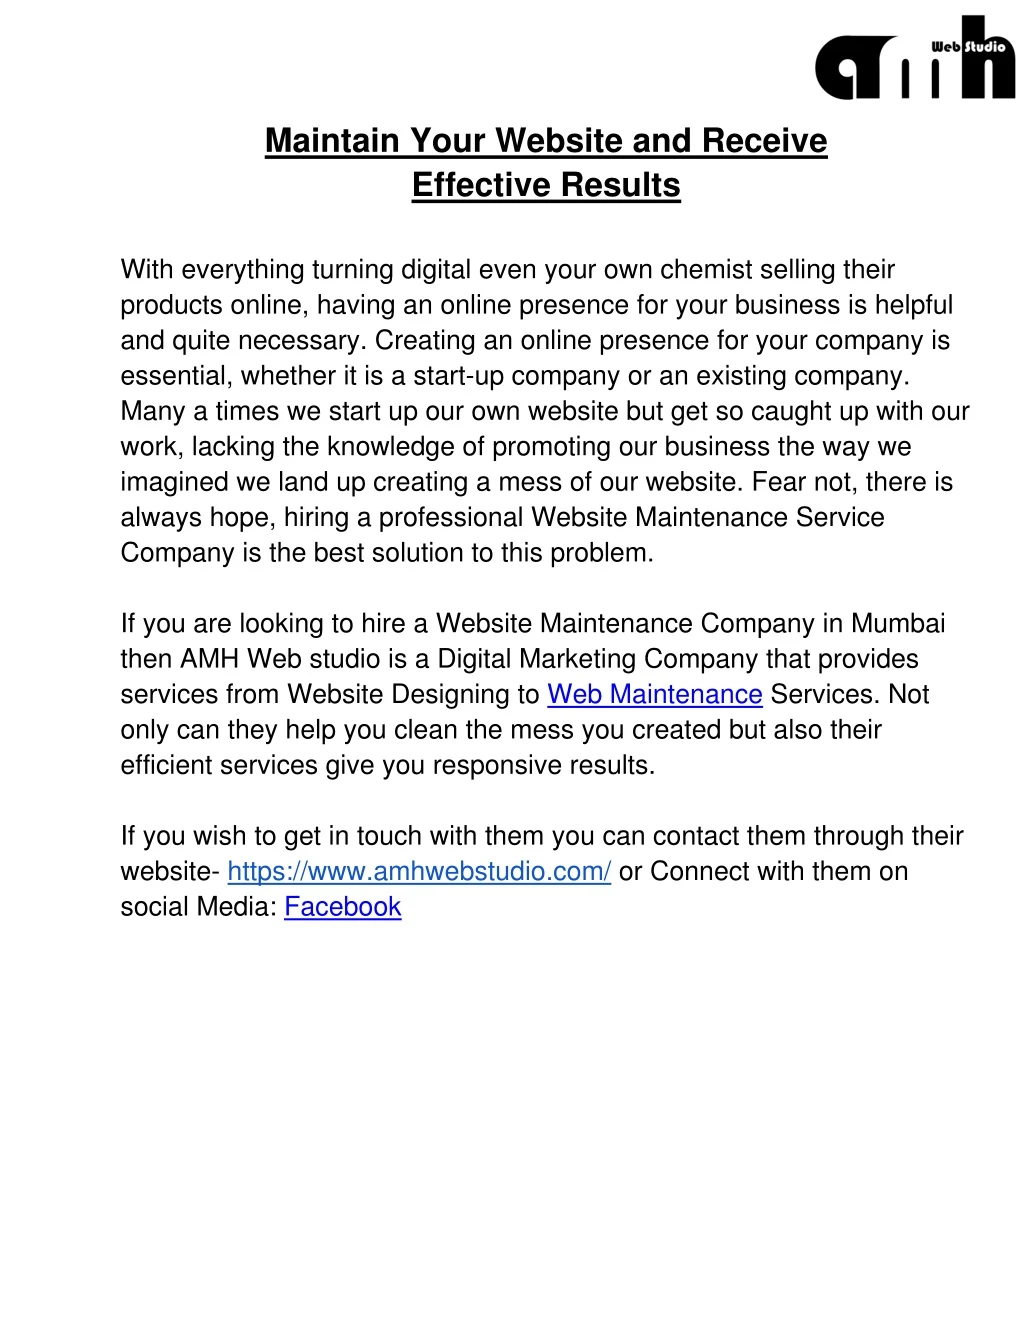 maintain your website and receive effective